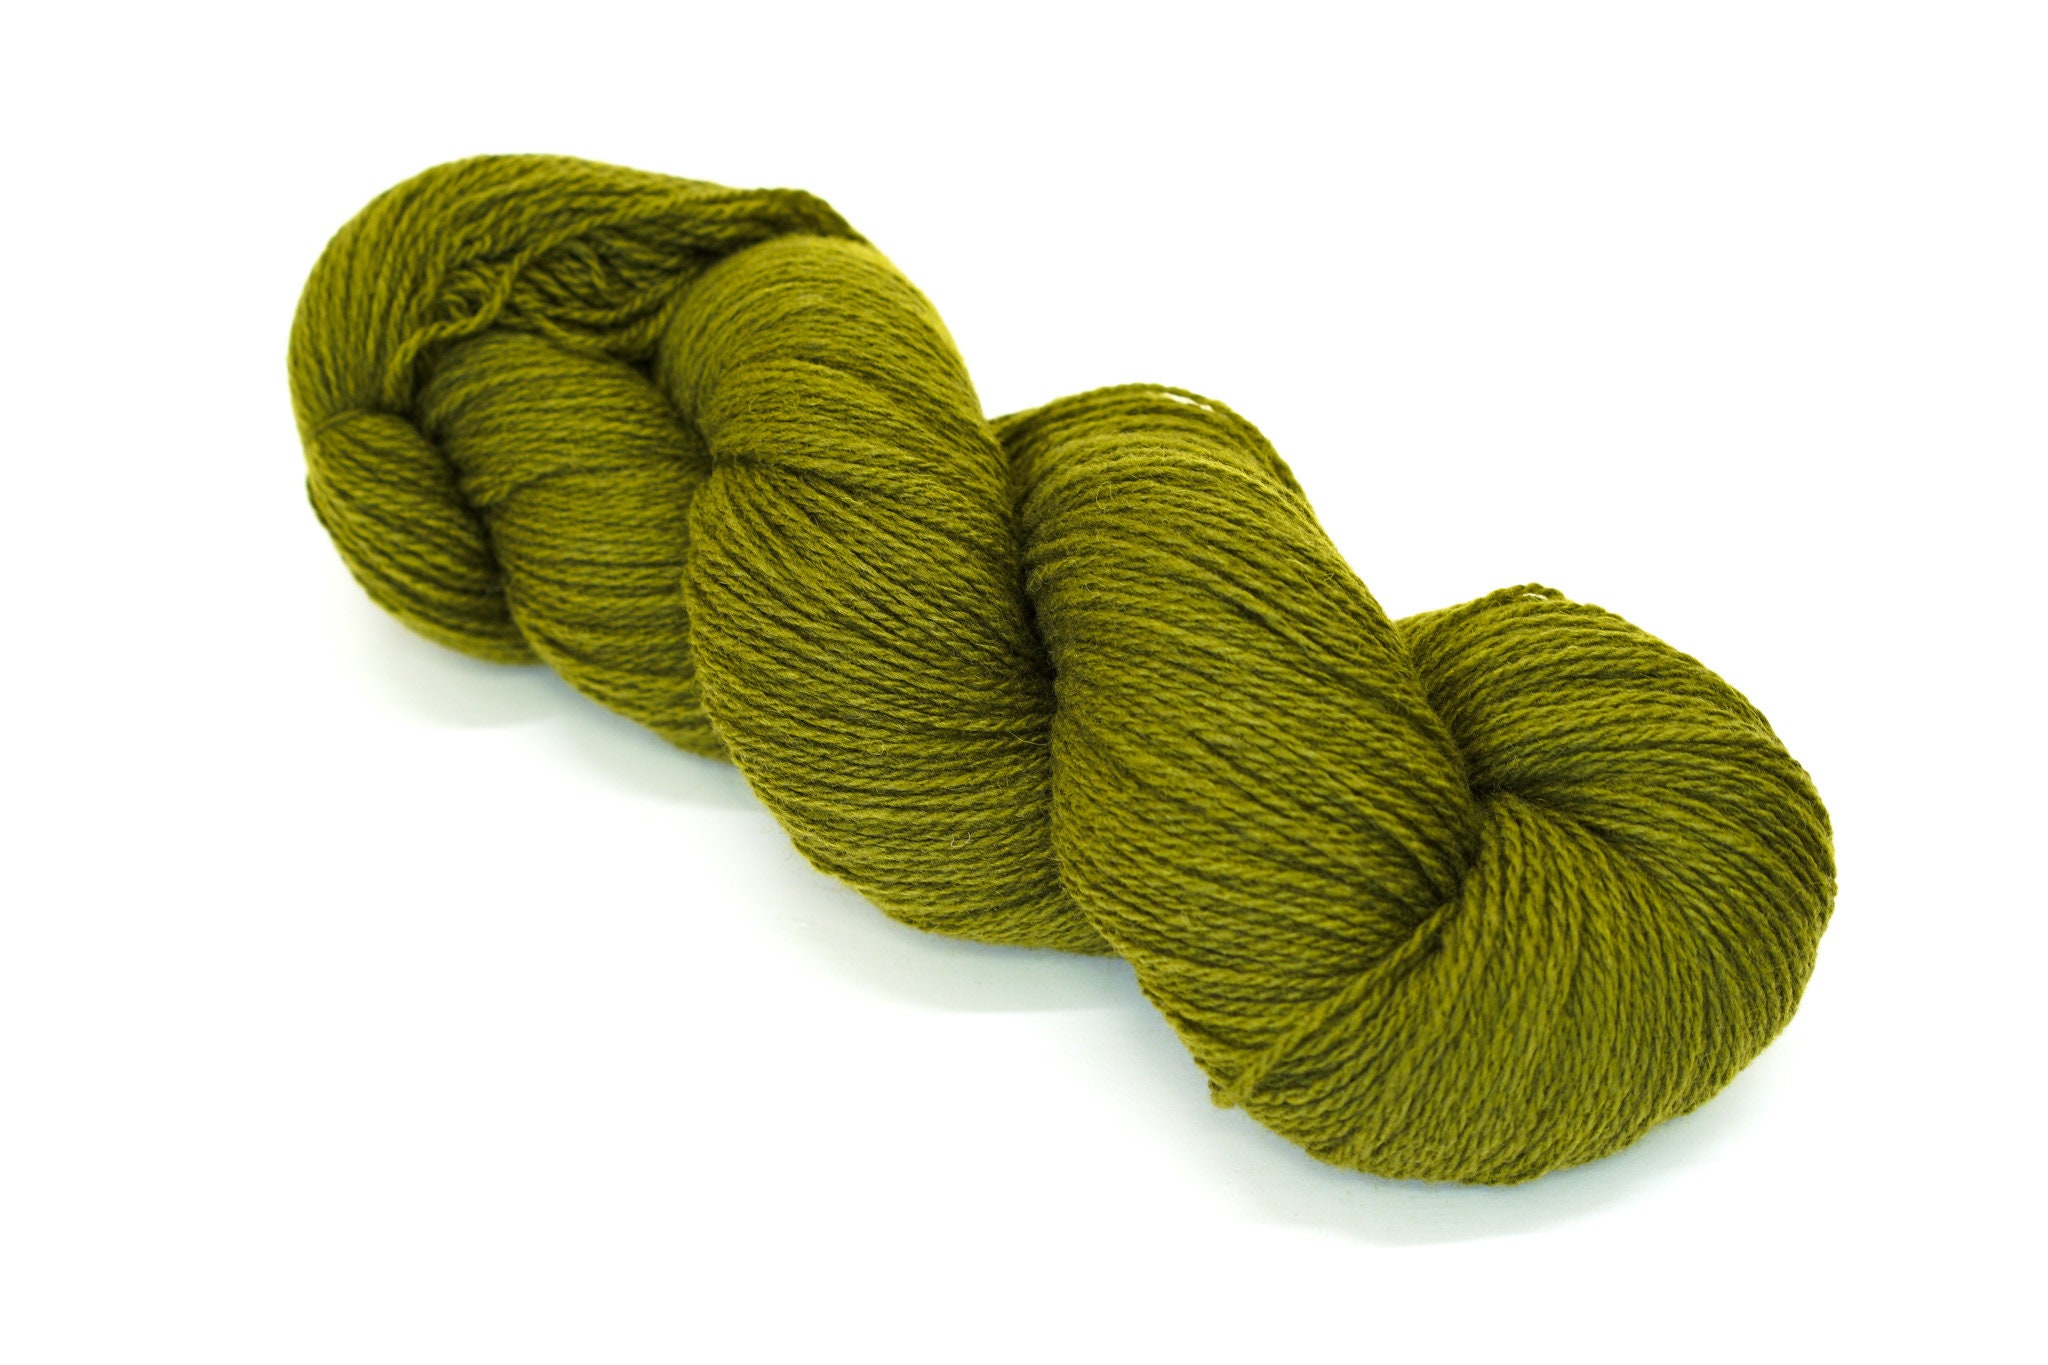 Moss Green Soft Merino Wool Yarn 440m/100g for Hand or Machine Knitting,  Crocheting, for Children and Adults Clothes, Weave Blankets 